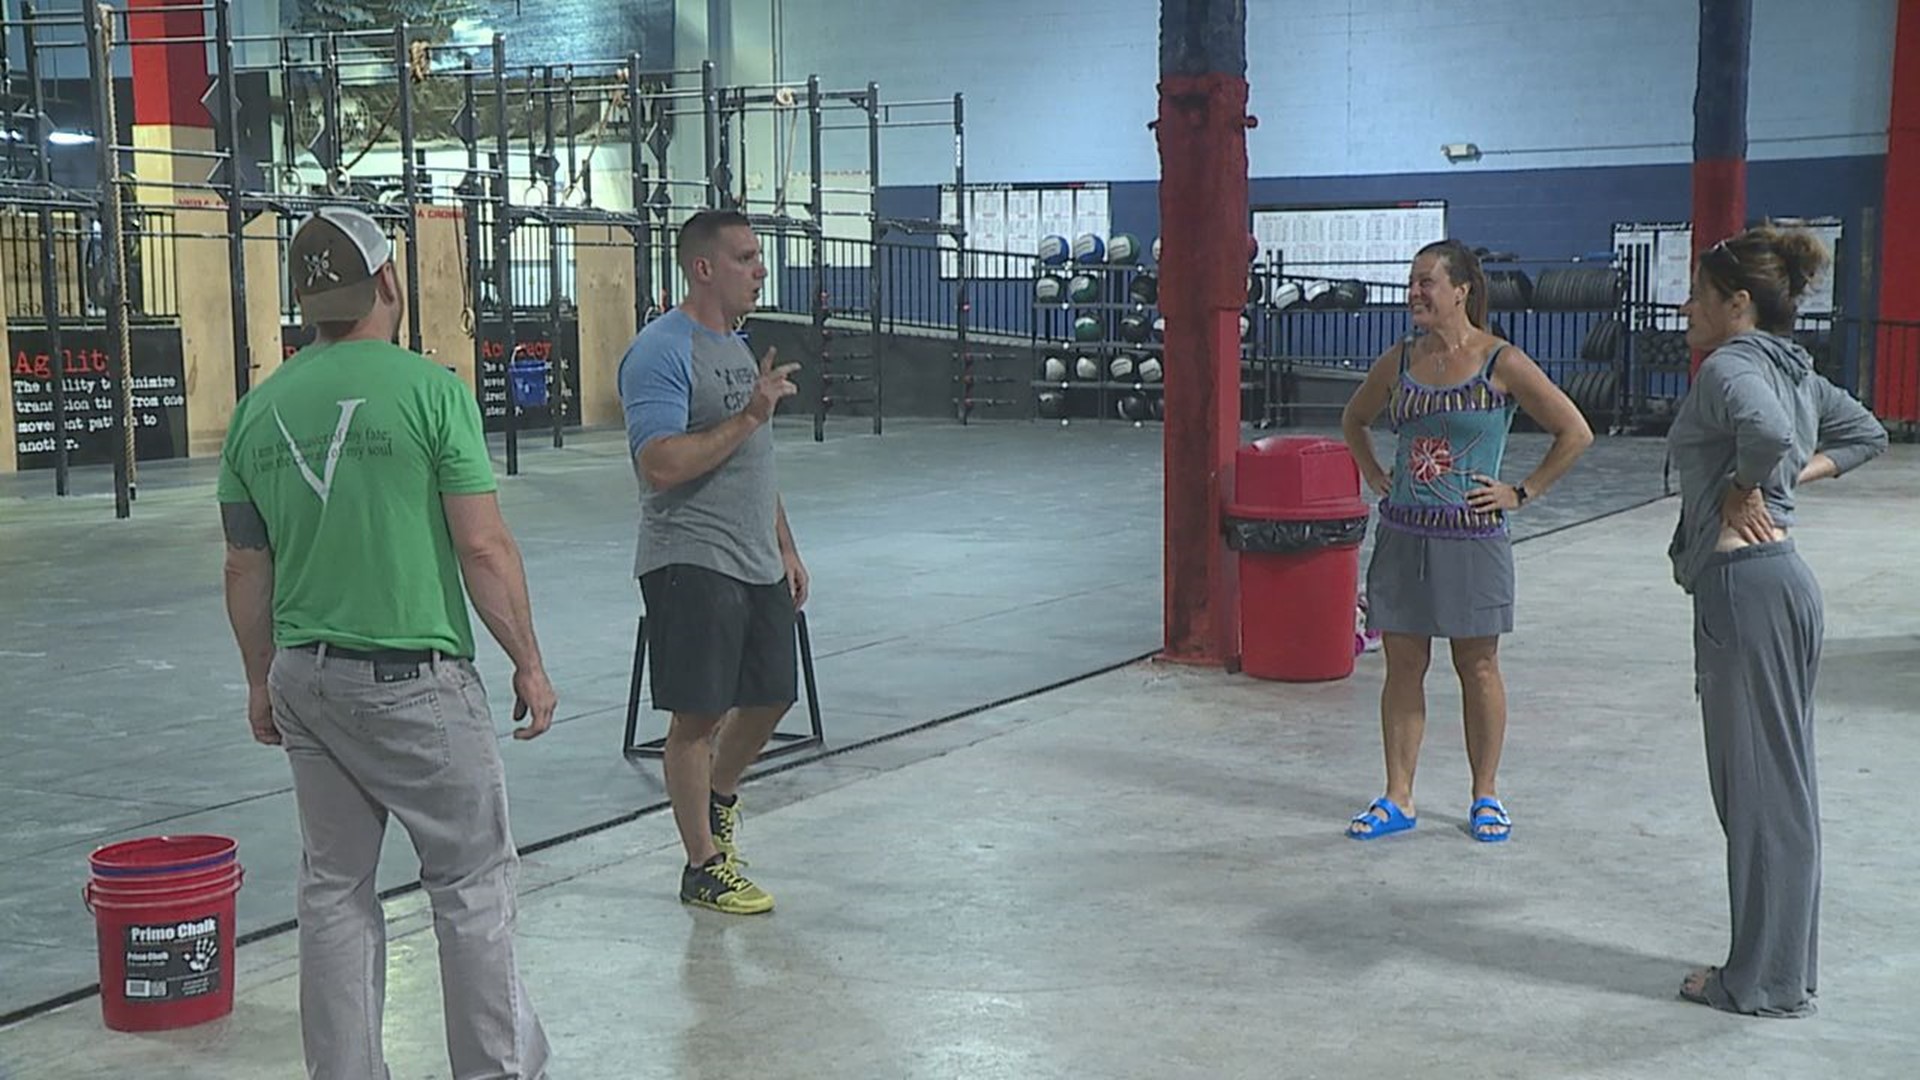 NEPA CrossFit dealing with repercussions of Greg Glassman's comments during pandemic